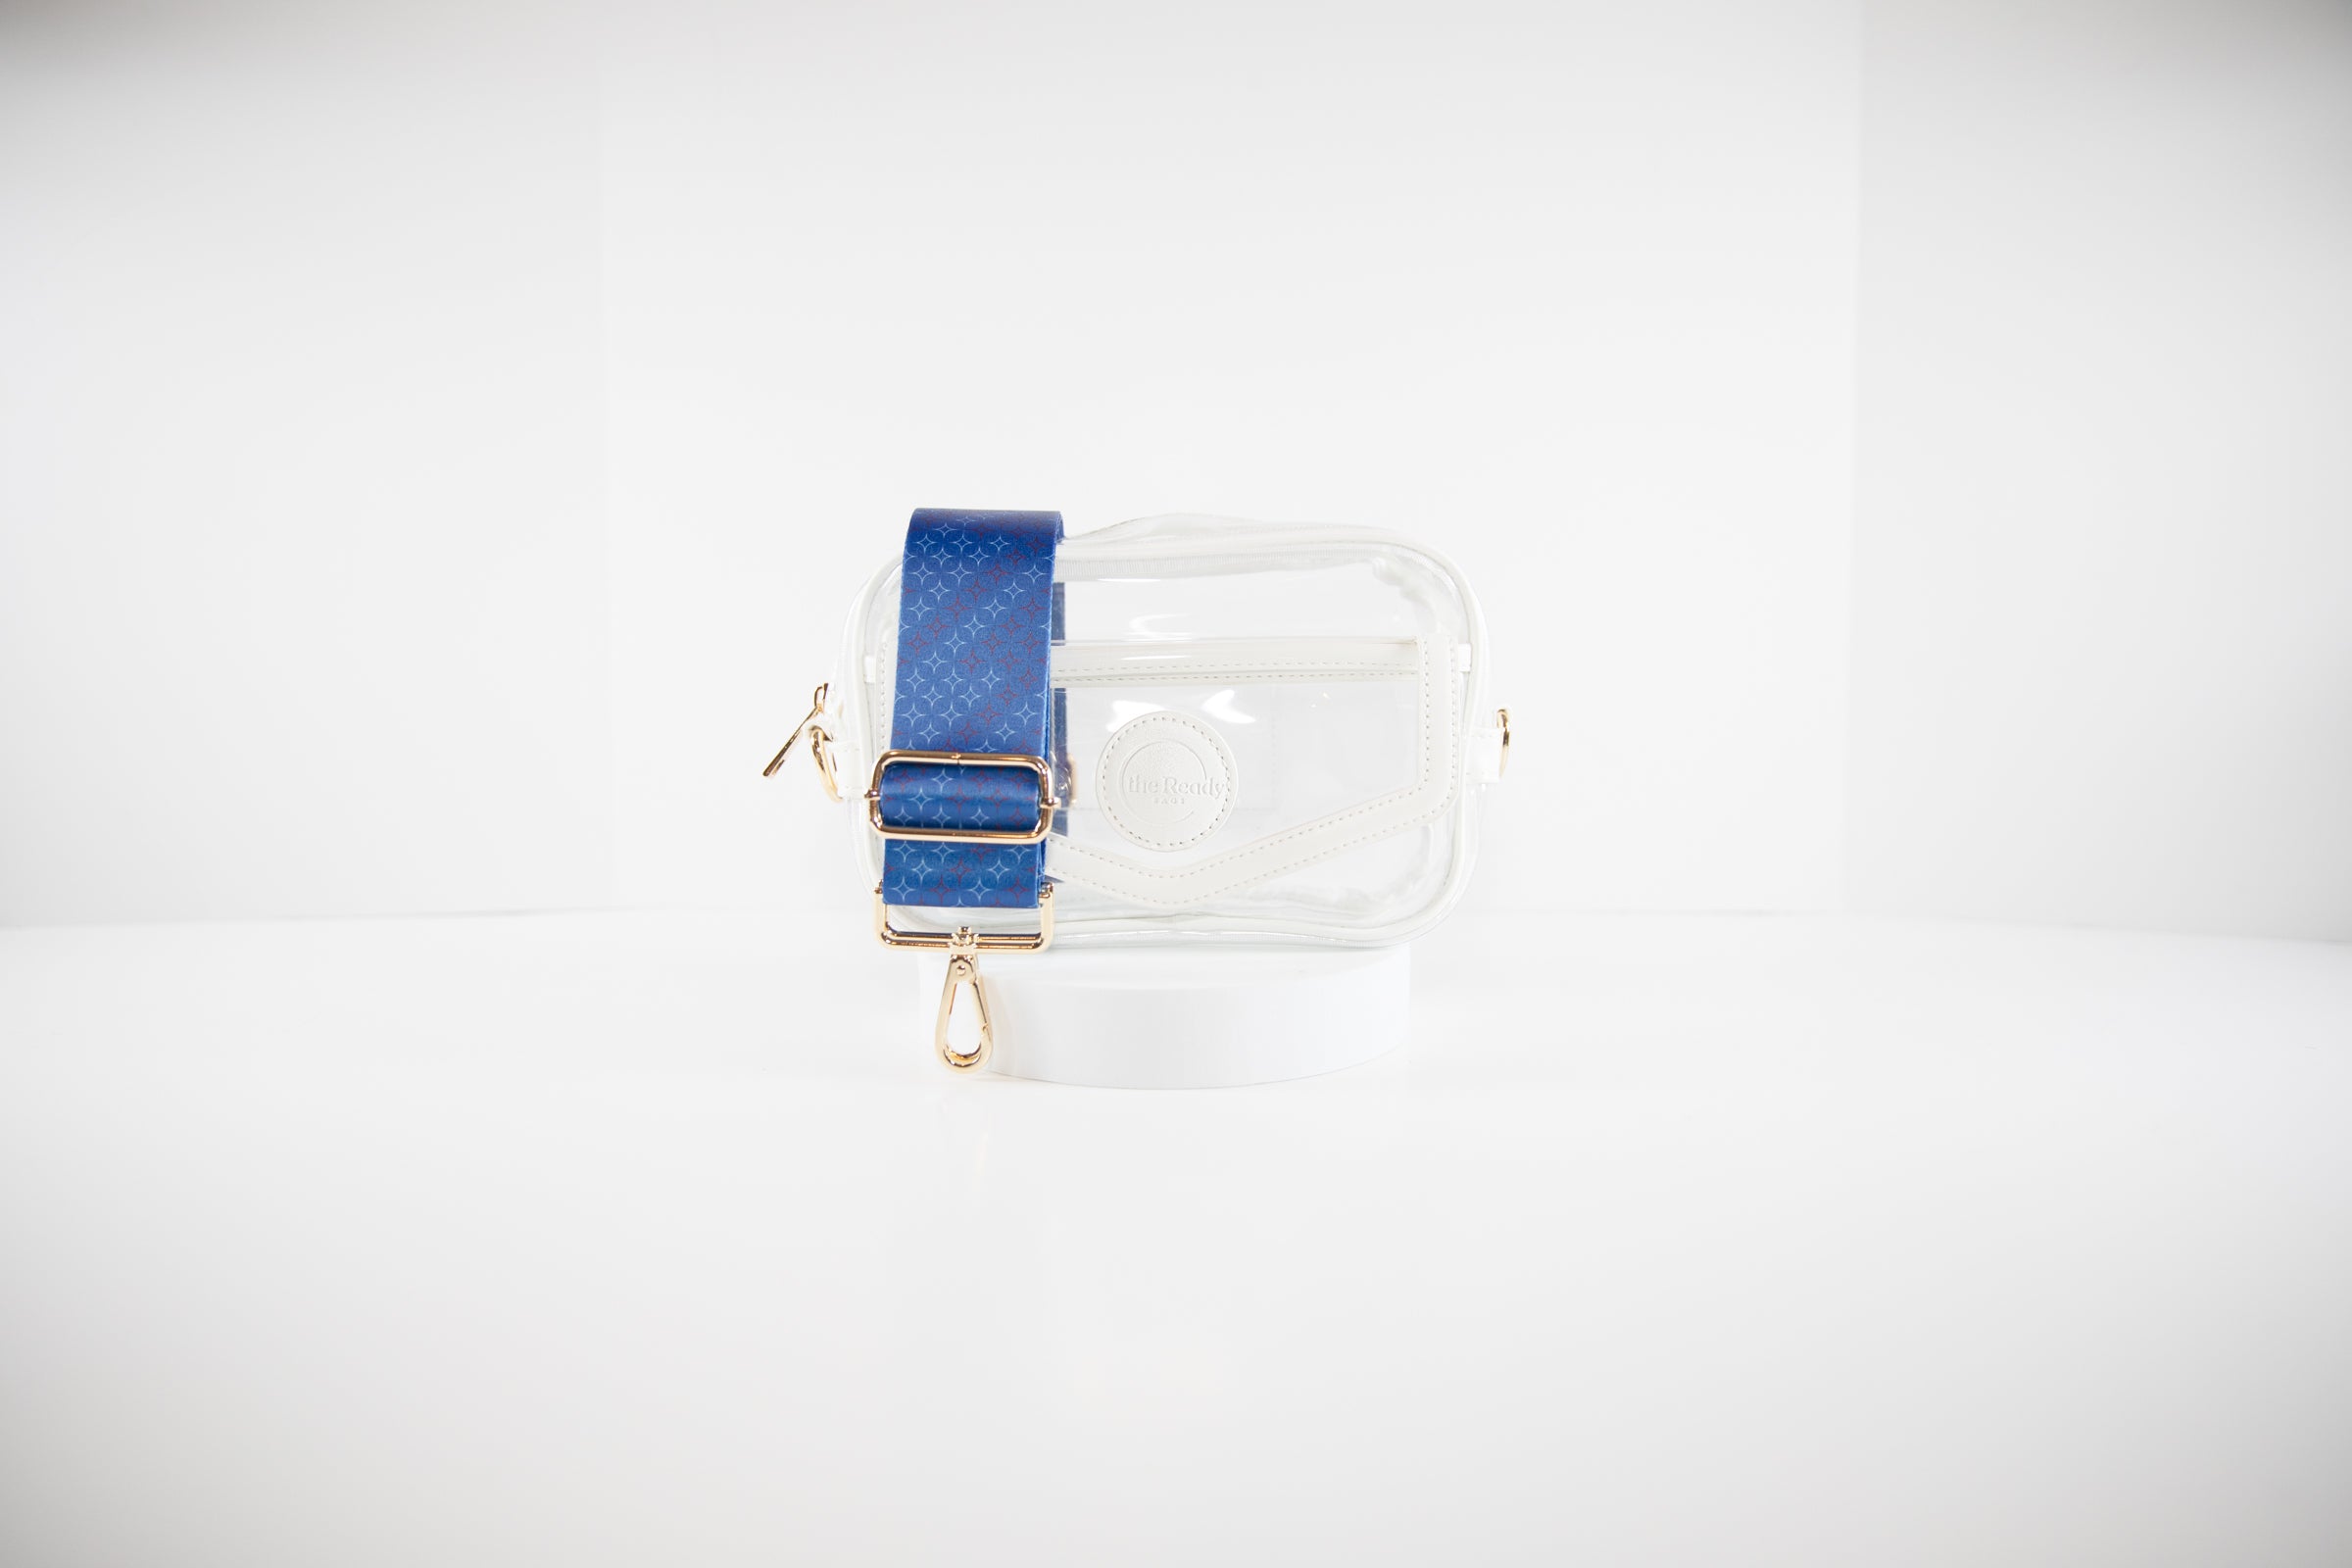 Clear stadium bag in white leather trim with a crossbody strap shown in red, white and blue Texas Rangers team colors